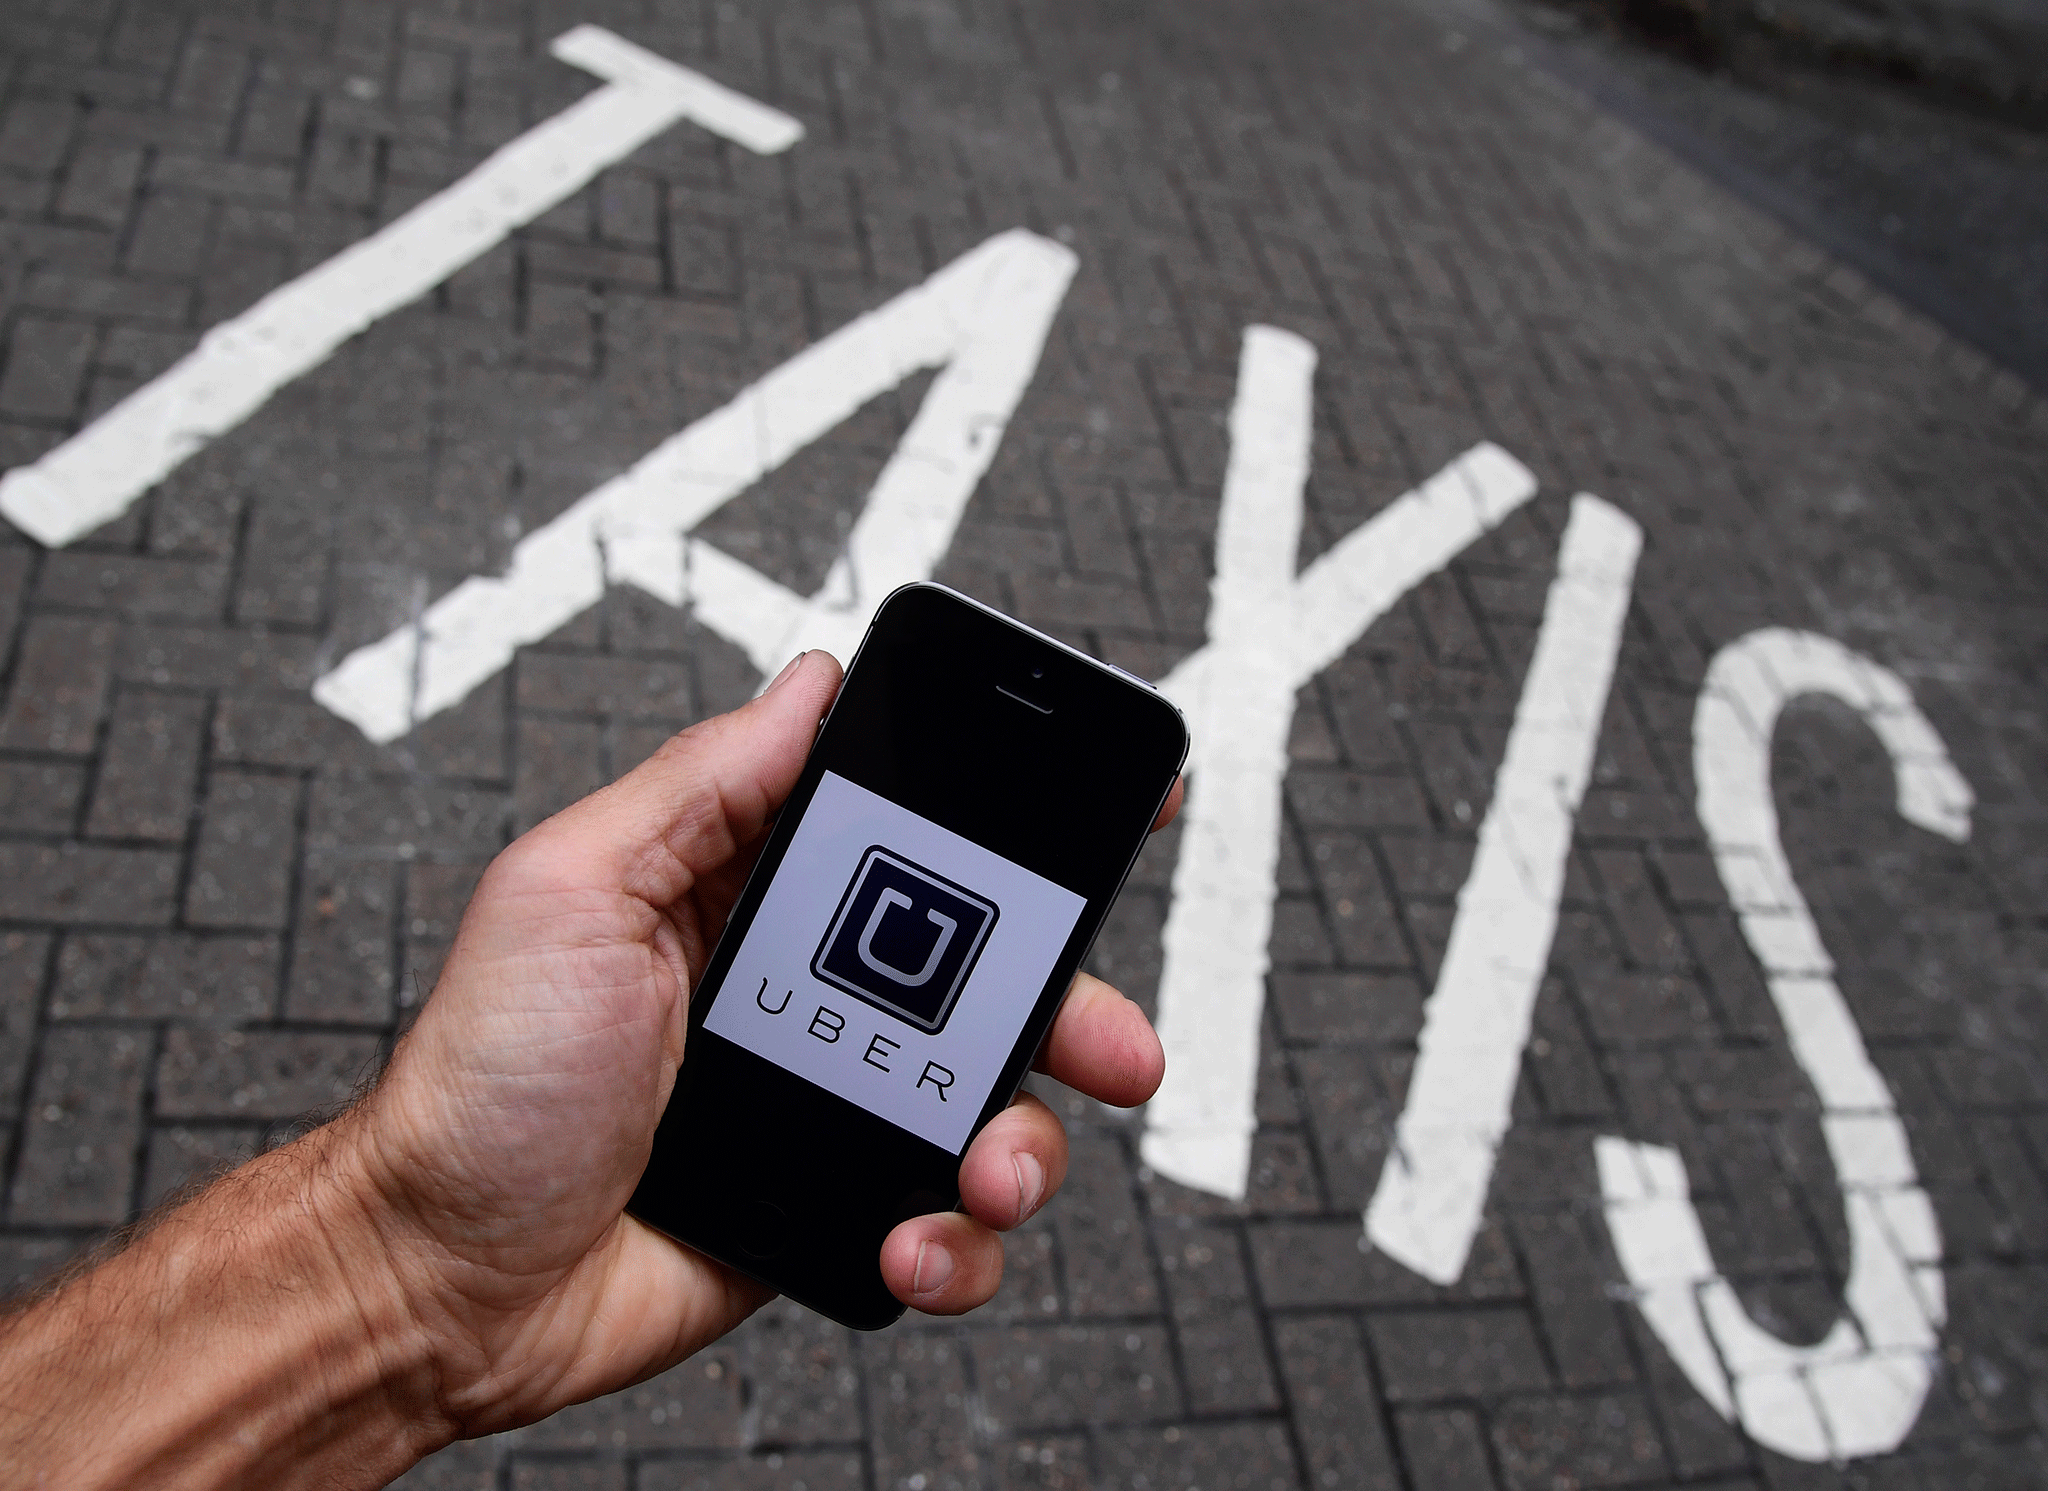 ​Social media campaigns have targeted Uber, urging users to delete their accounts and choose rival taxi firms such as Lyft